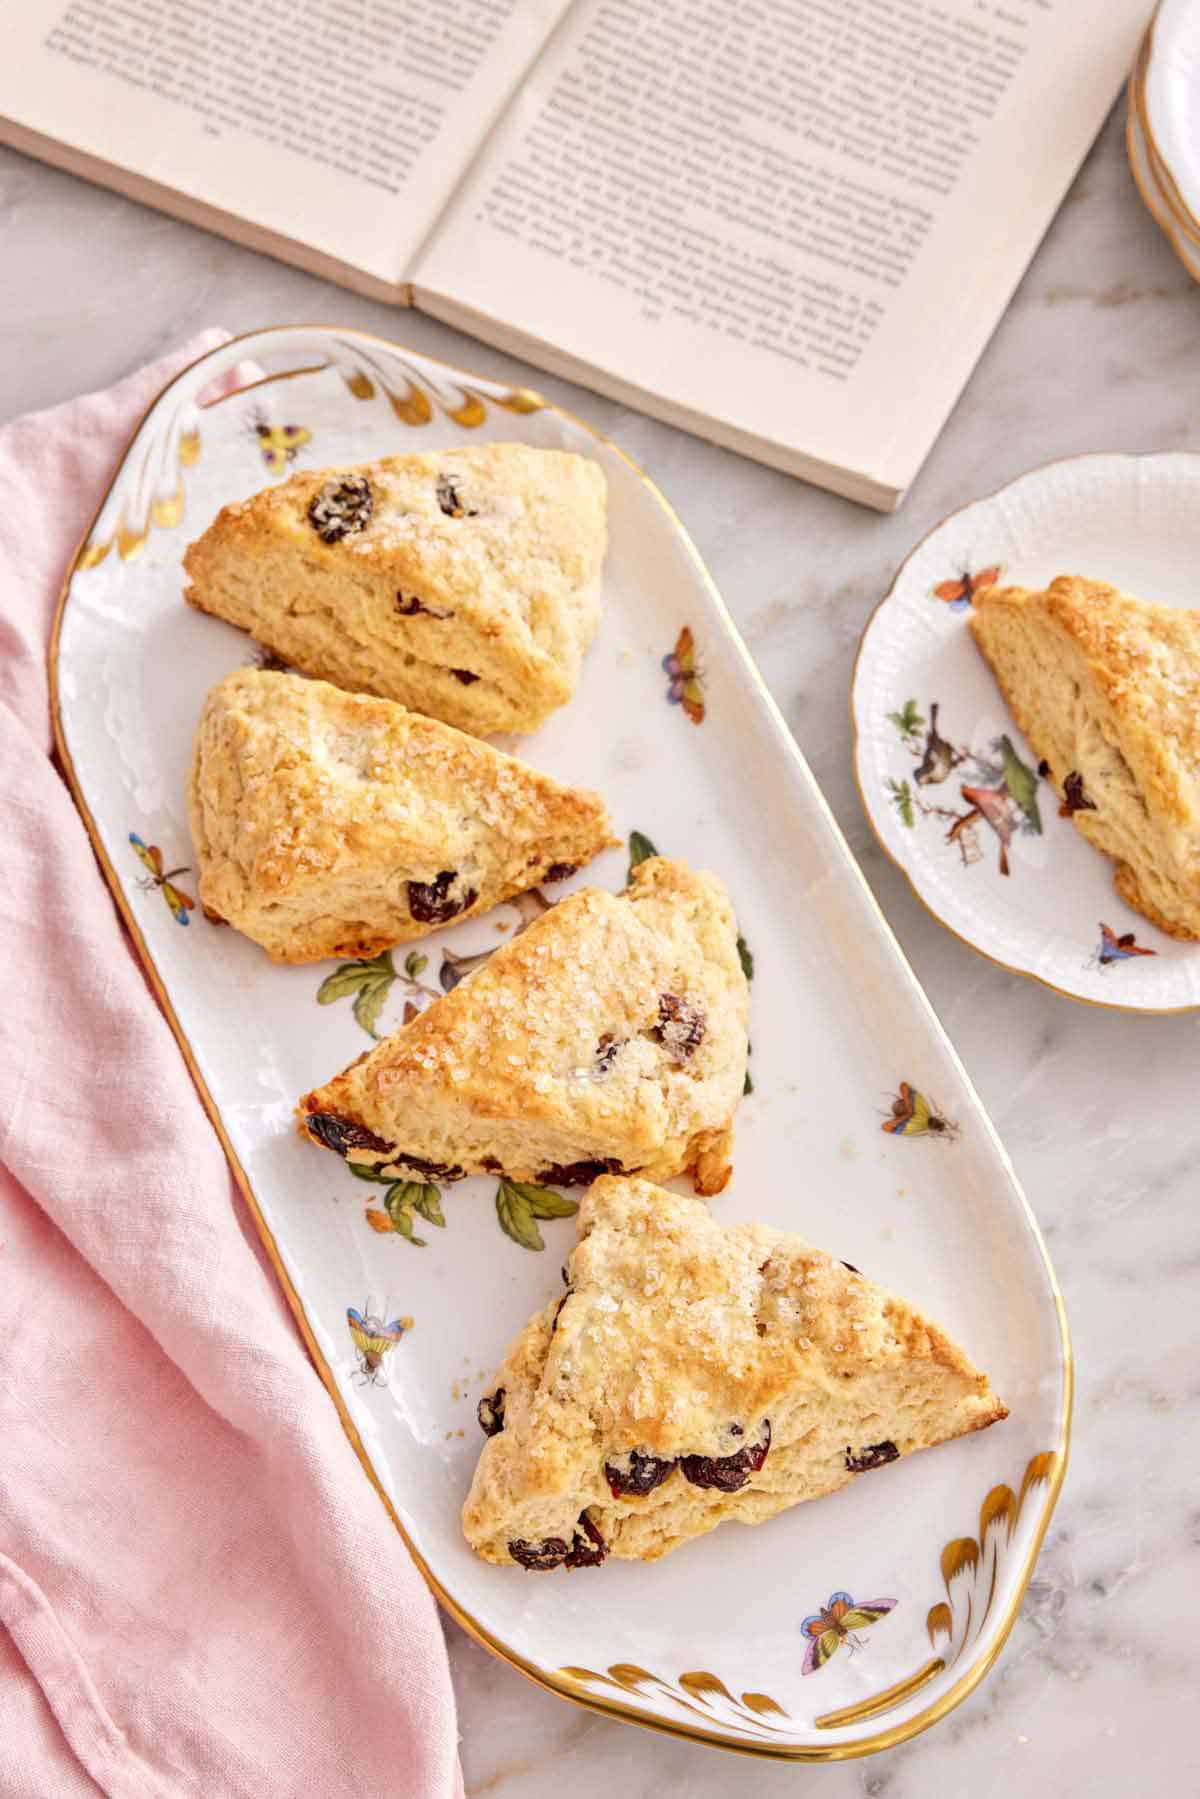 Overhead view of a platter with four scones by an opened book and a scone on a plate.